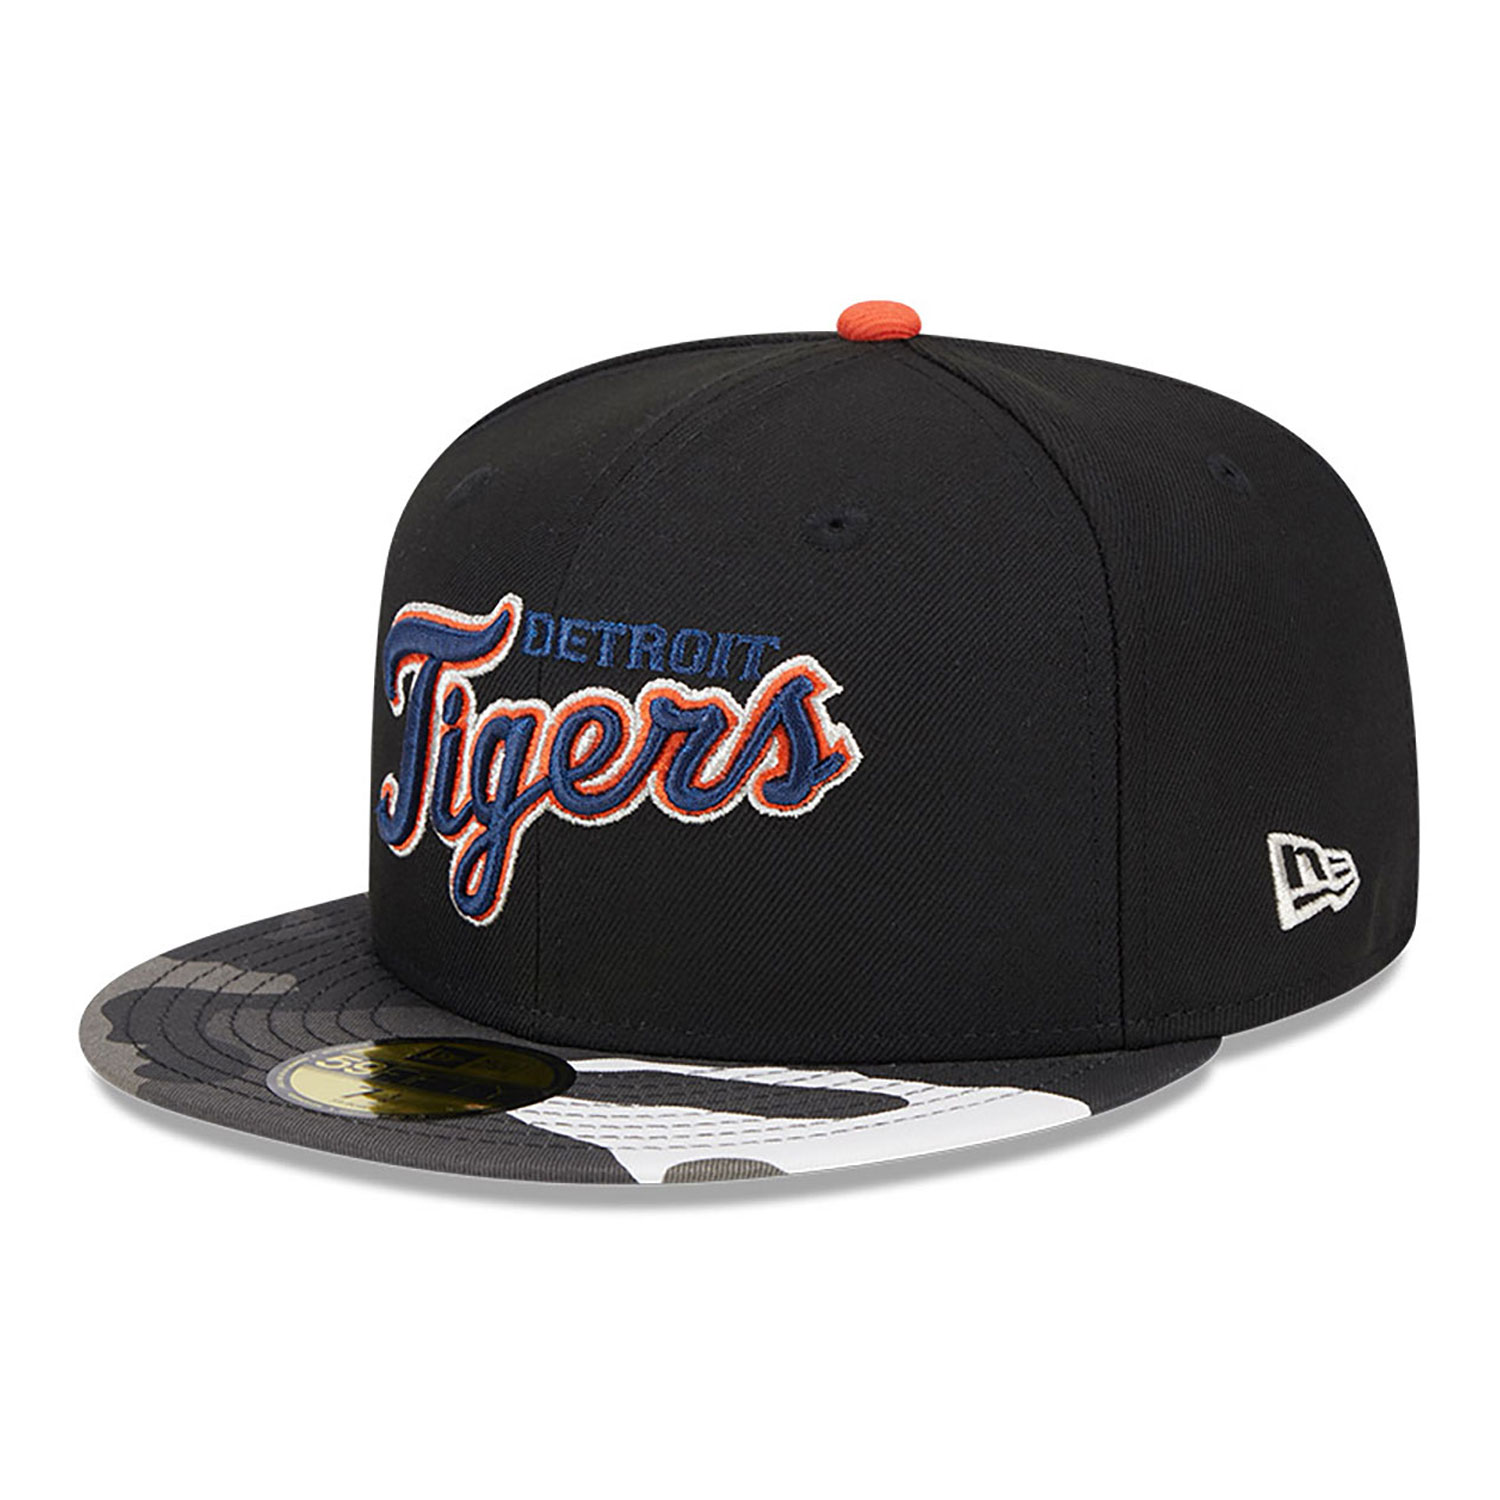 Detroit Tigers Metallic Camo Black 59FIFTY Fitted Cap